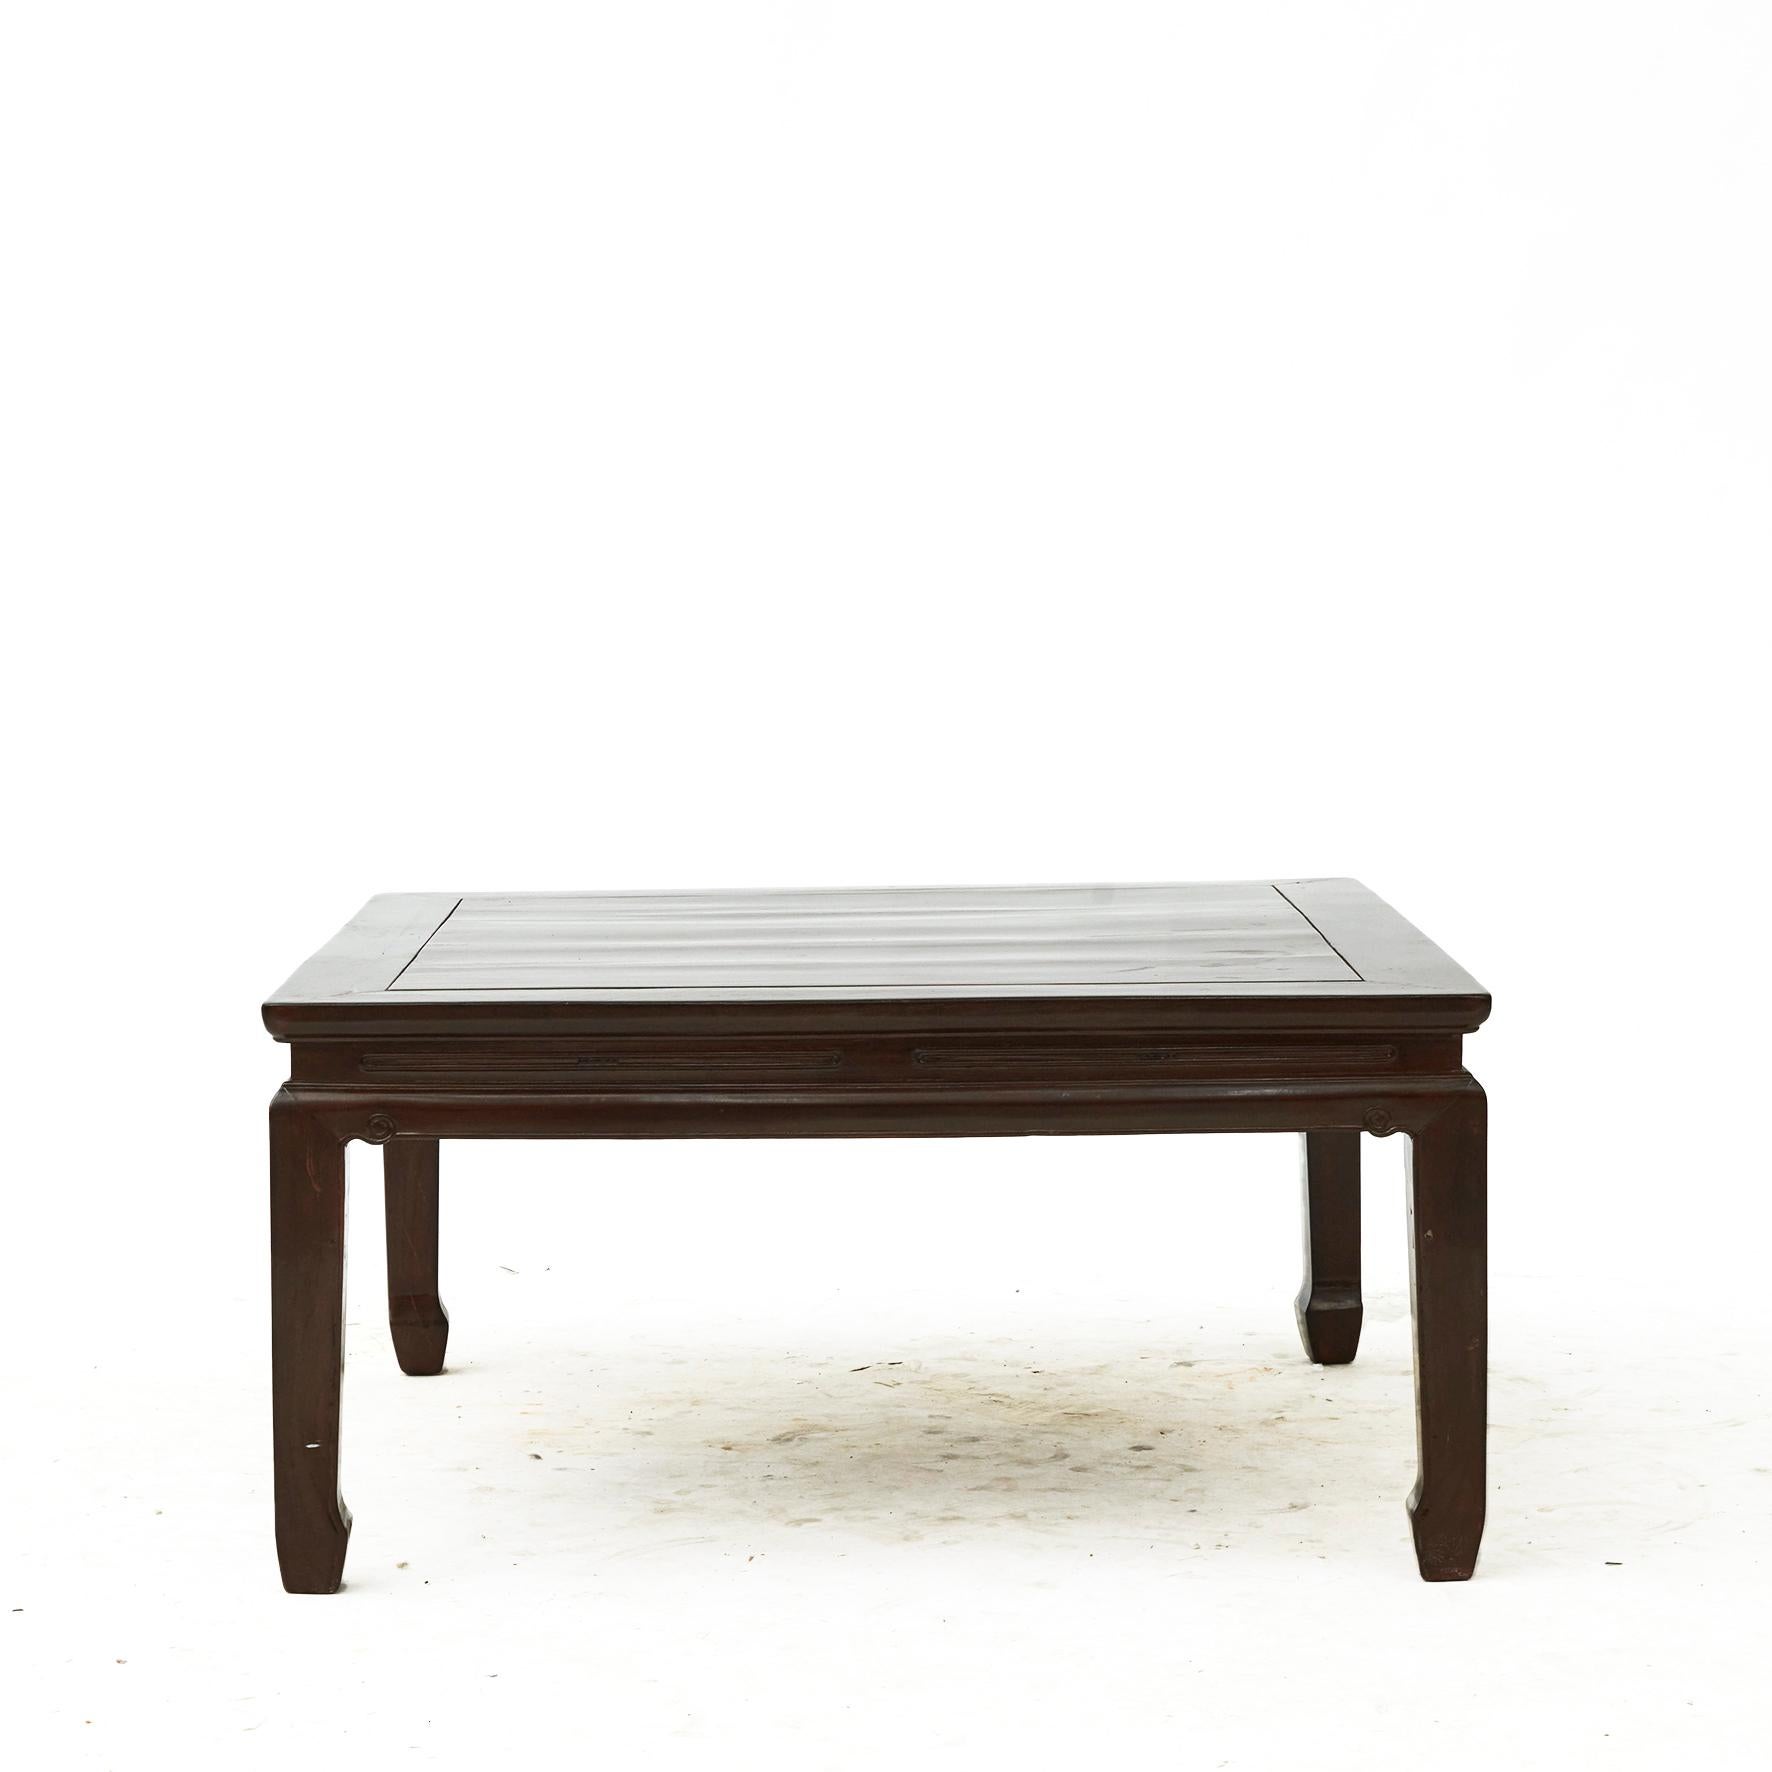 Chinese low rectangular coffee table made in walnut. Ming style.
A fine and elegant example of classical Chinese furniture in cabinet-maker quality.

Jiangsu Province 1860-1880.